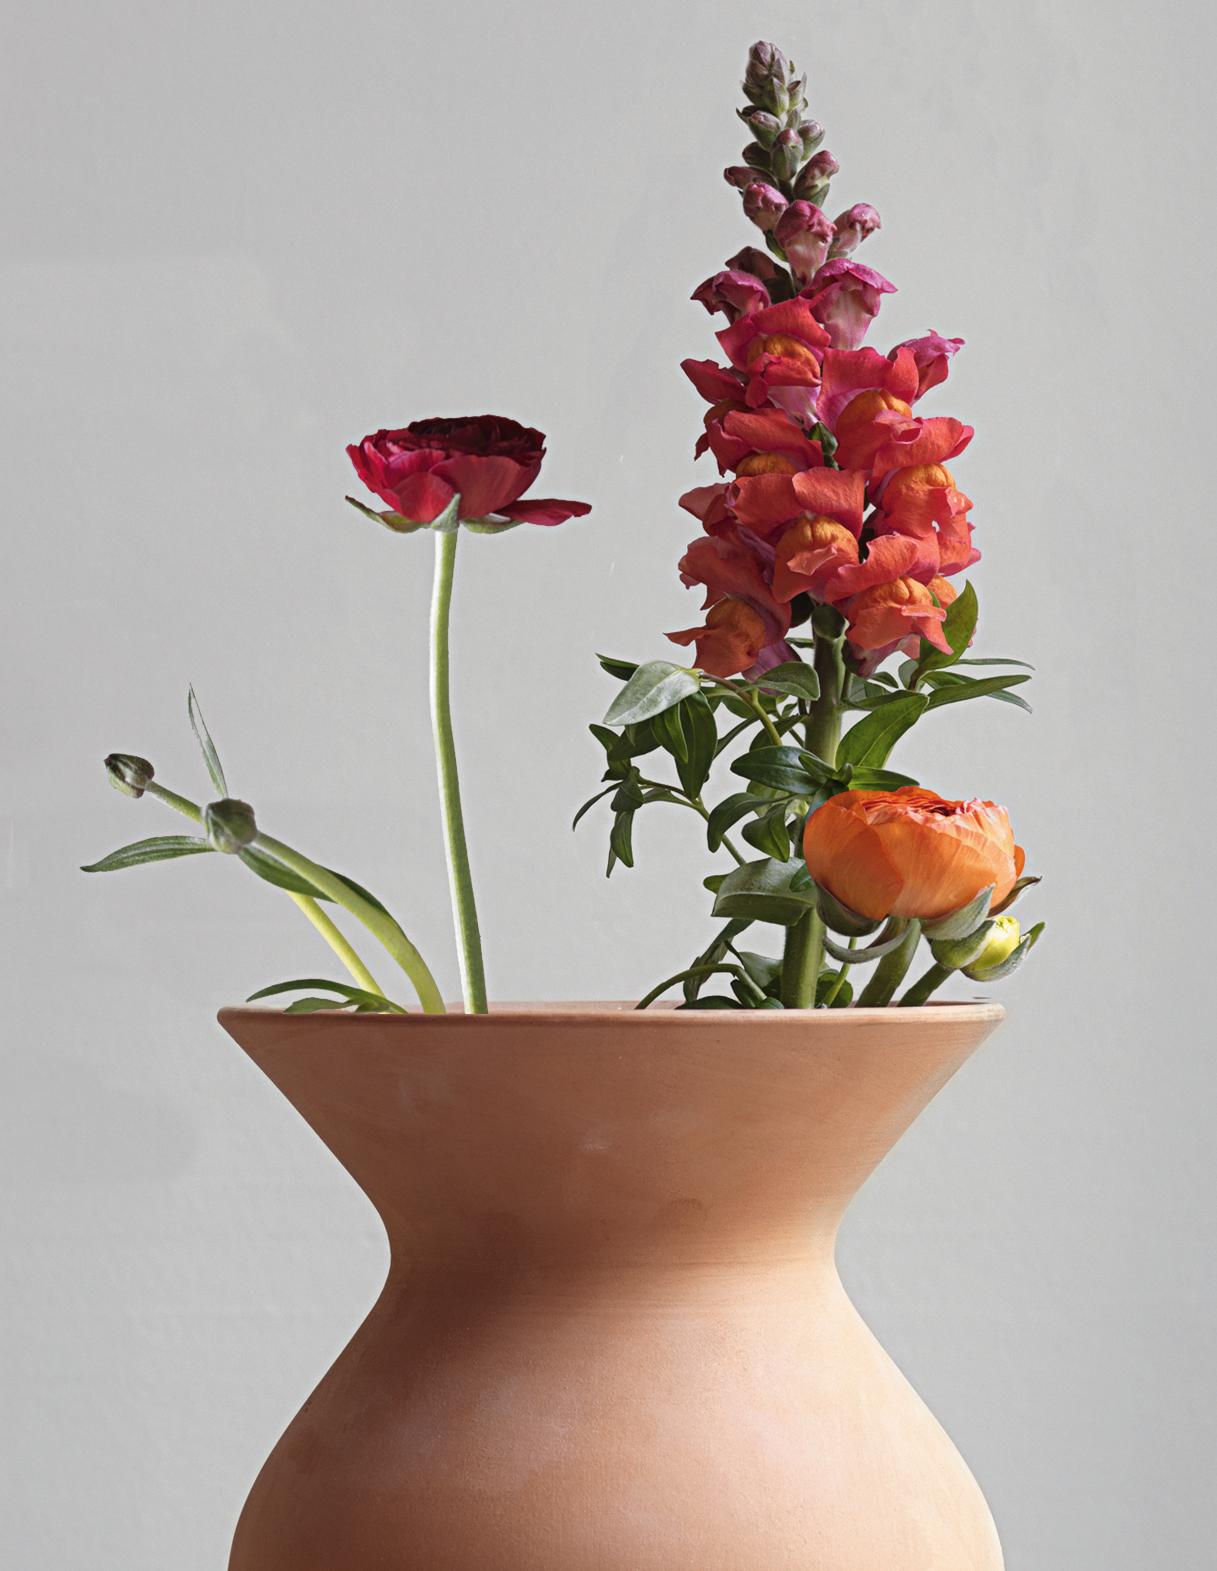 Hand-Crafted Set of 3 Outdoor Terracotta Vases from the series 